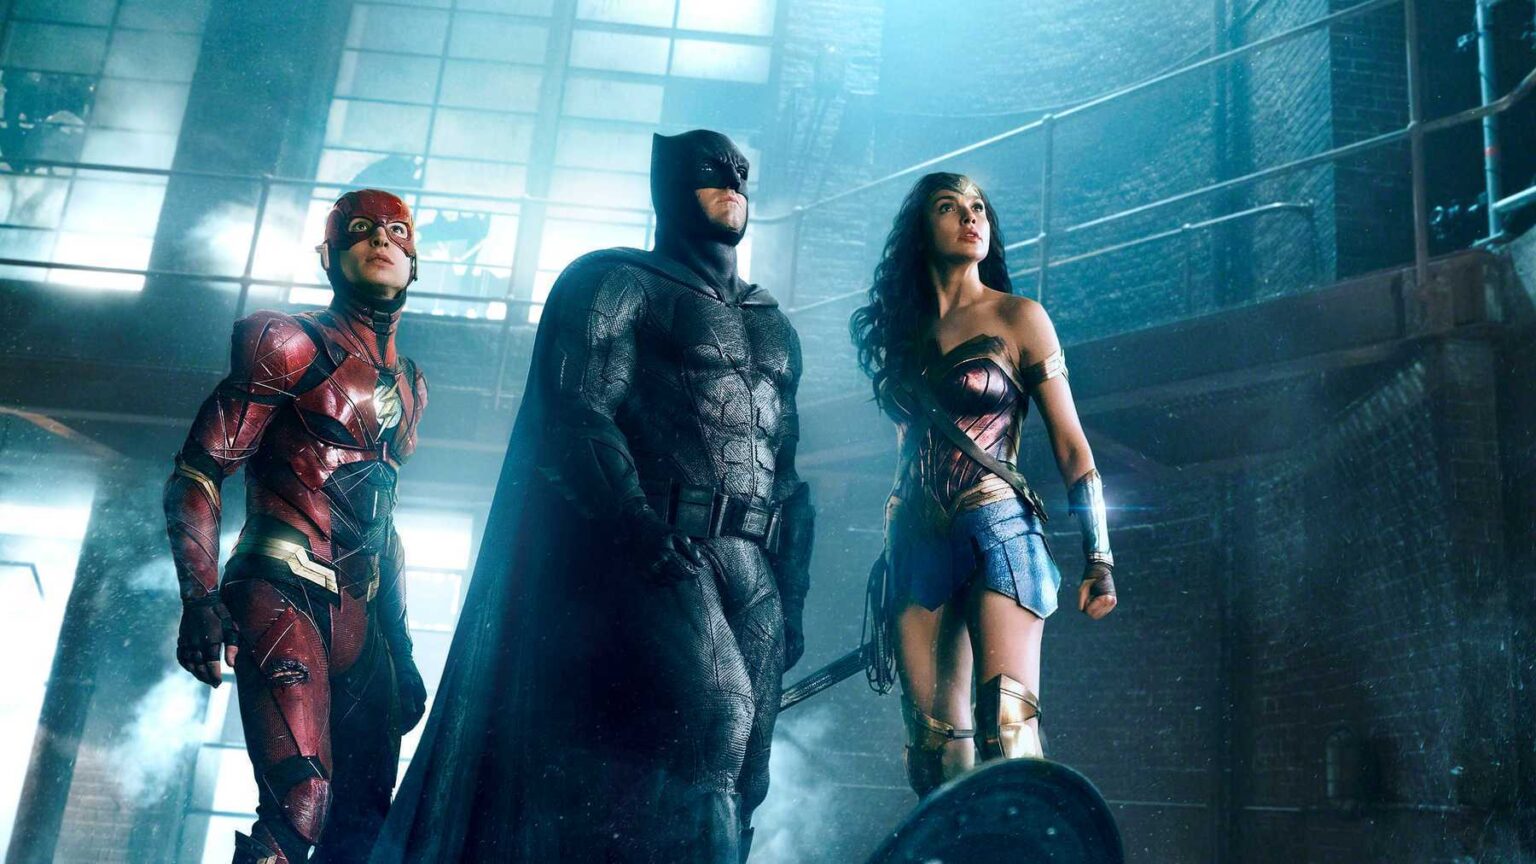 Last August, WarnerMedia opened an investigation into occurrences on the set of 'Justice League'. What has happened with the cast?